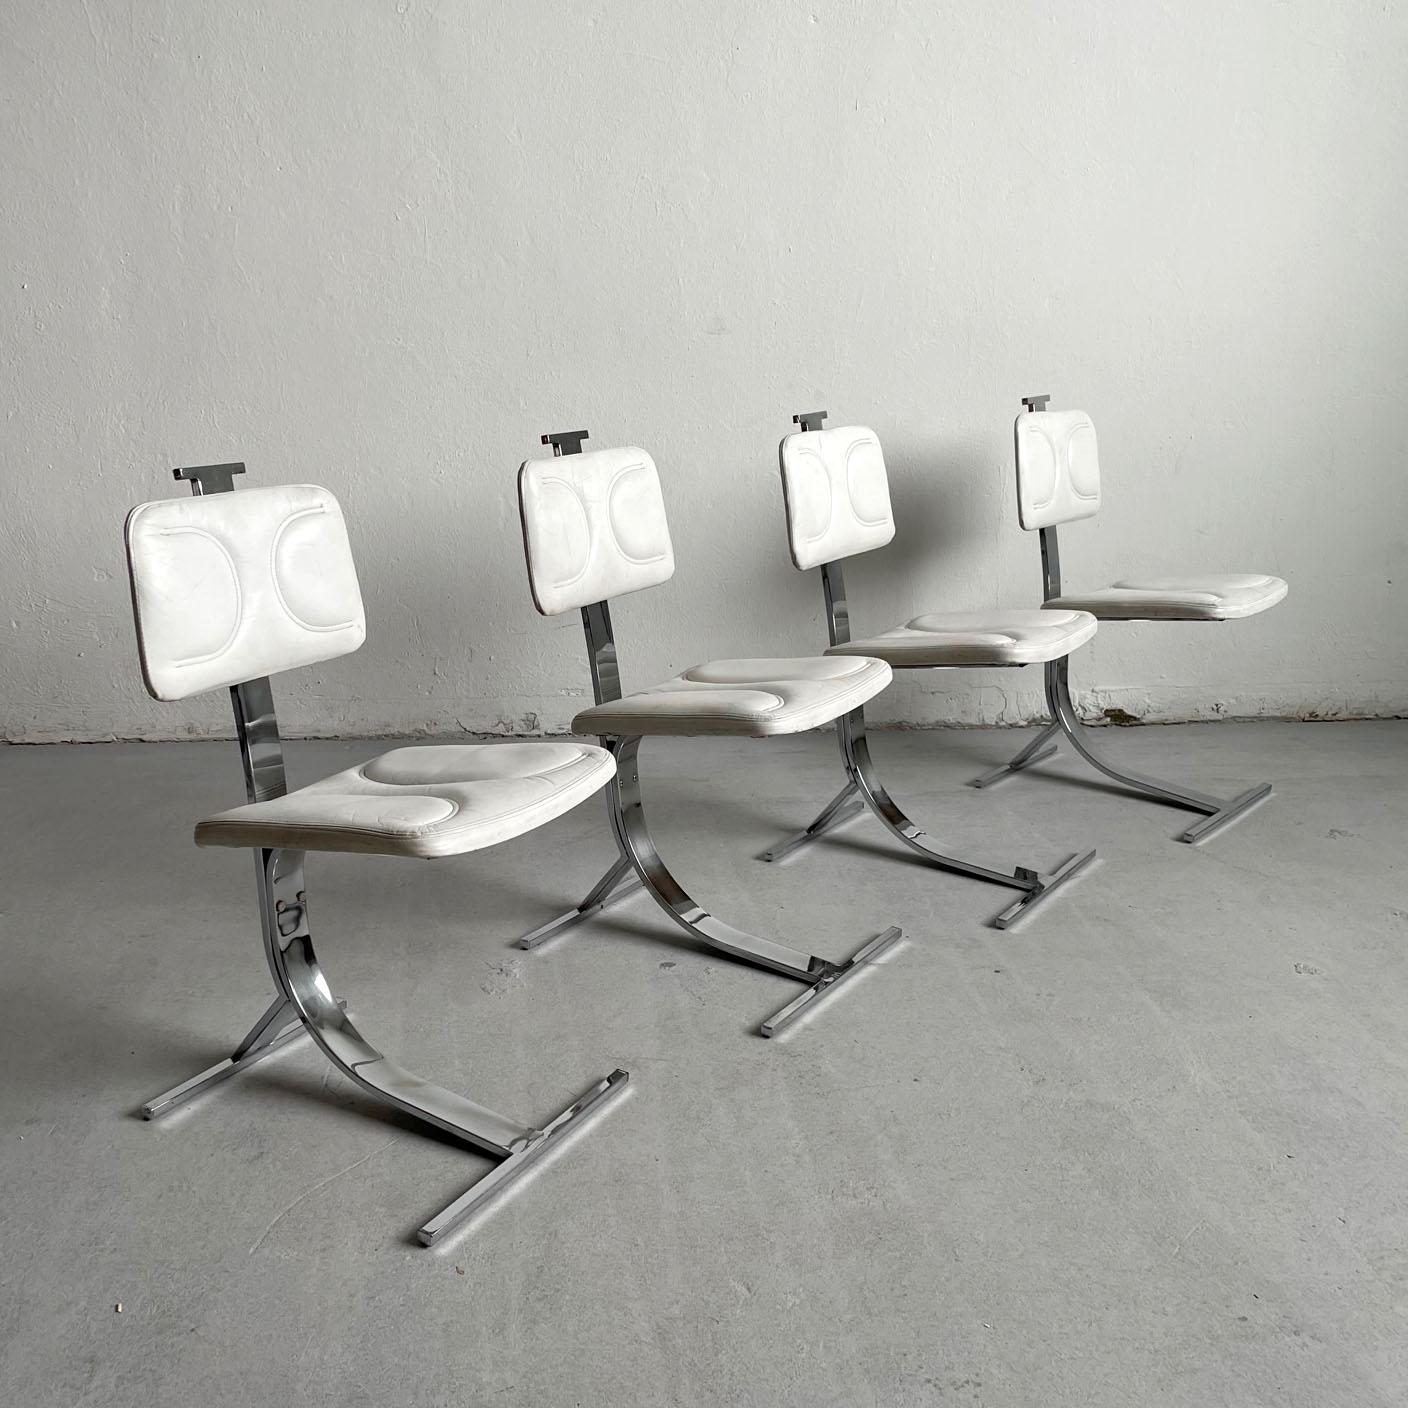 Galvanized Set of 4 Maison CC Dining Chairs, Vittorio Introini Style, France, 1970s For Sale